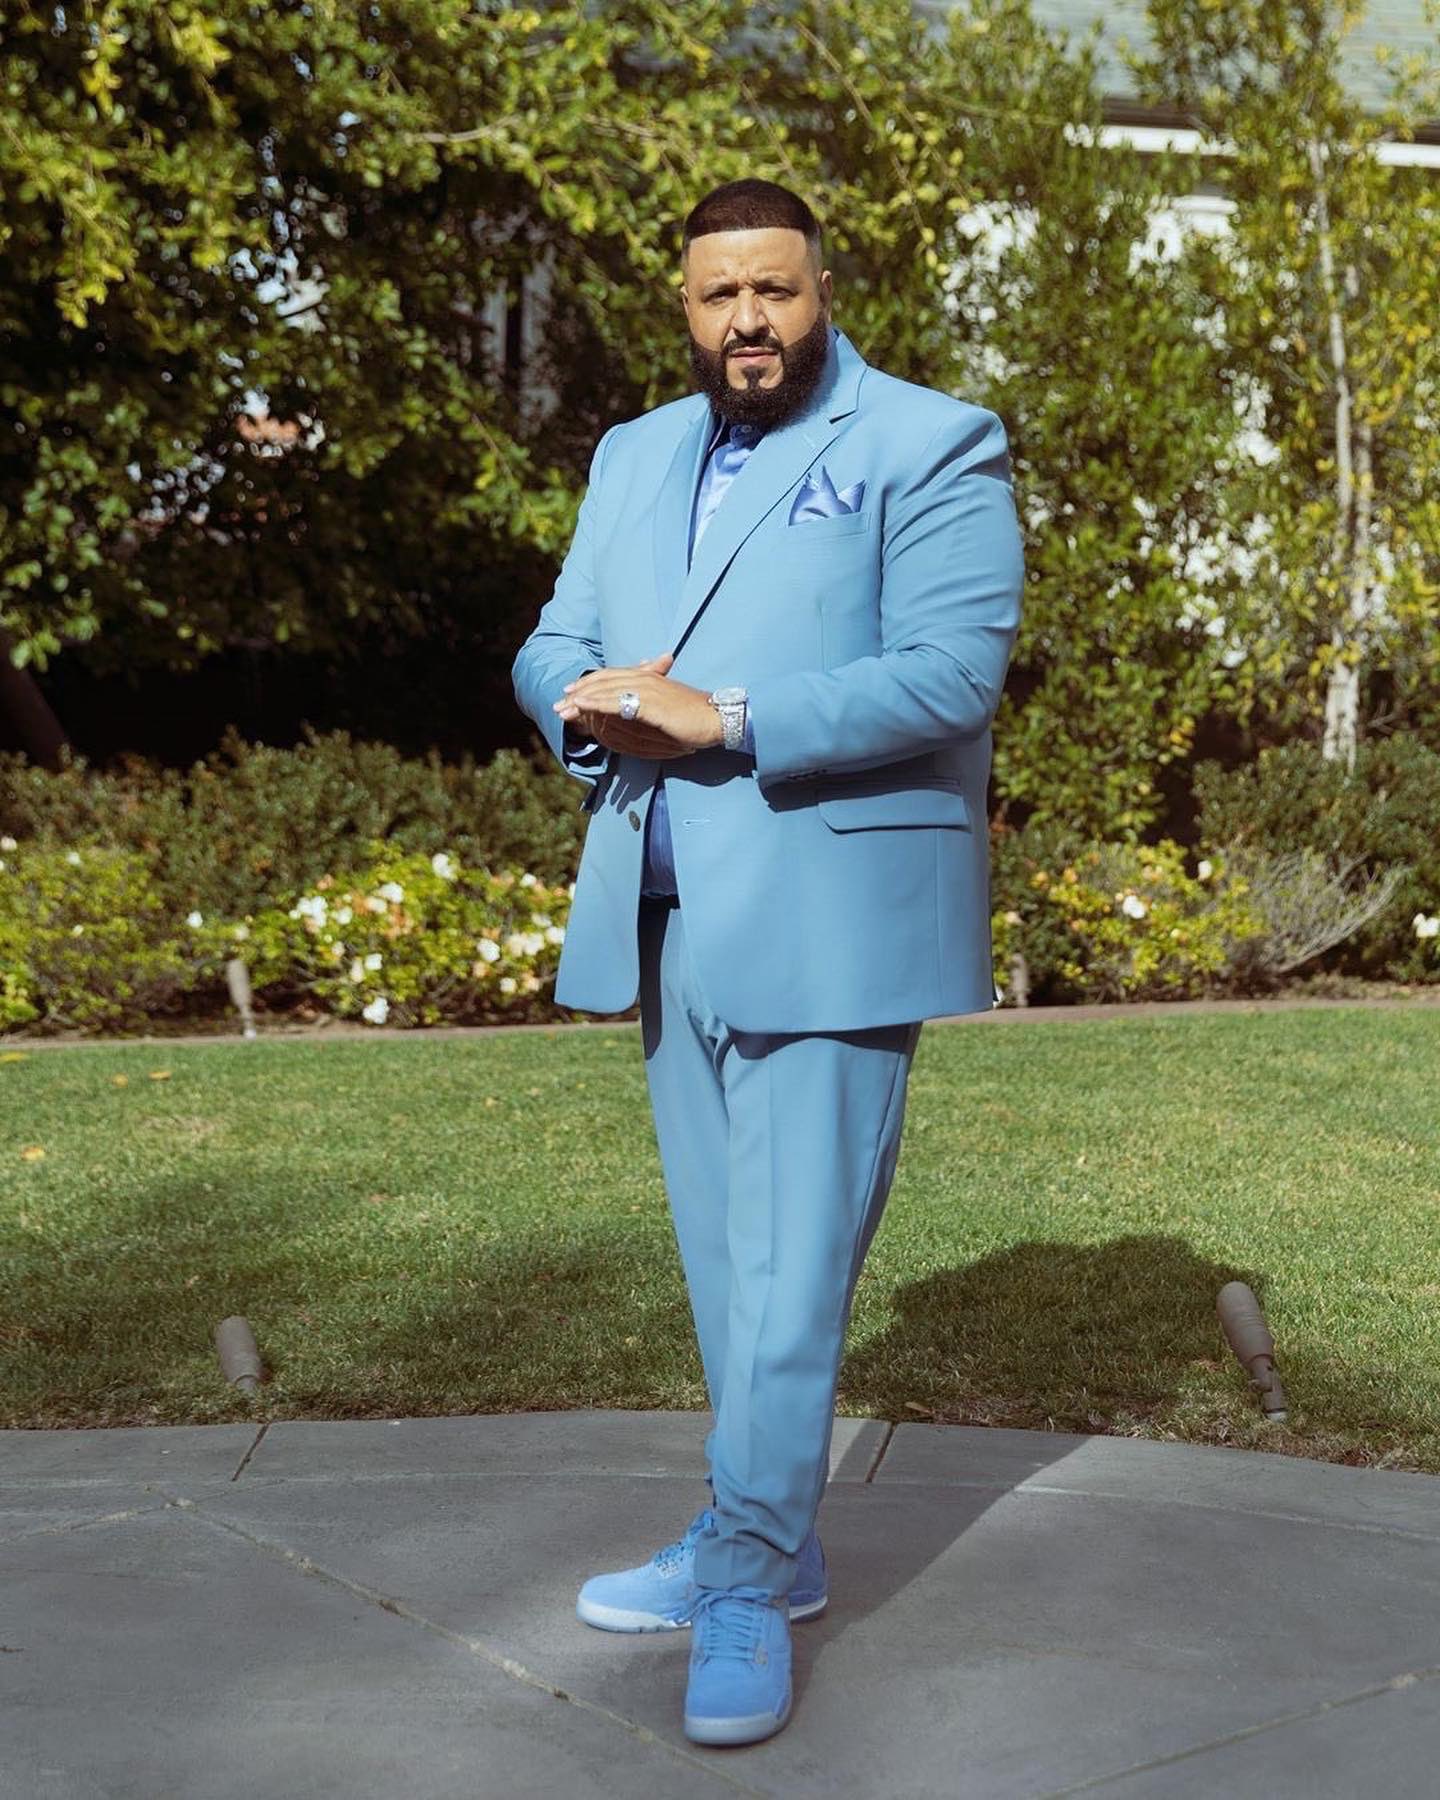 AdaObi on X: "2. DJ Khaled I think I will call this Ocean Blue Suit. He  dared to go all blue down to his shoes. It's refreshing  to see.  #RocNationBrunch https://t.co/MvF384qI78" /